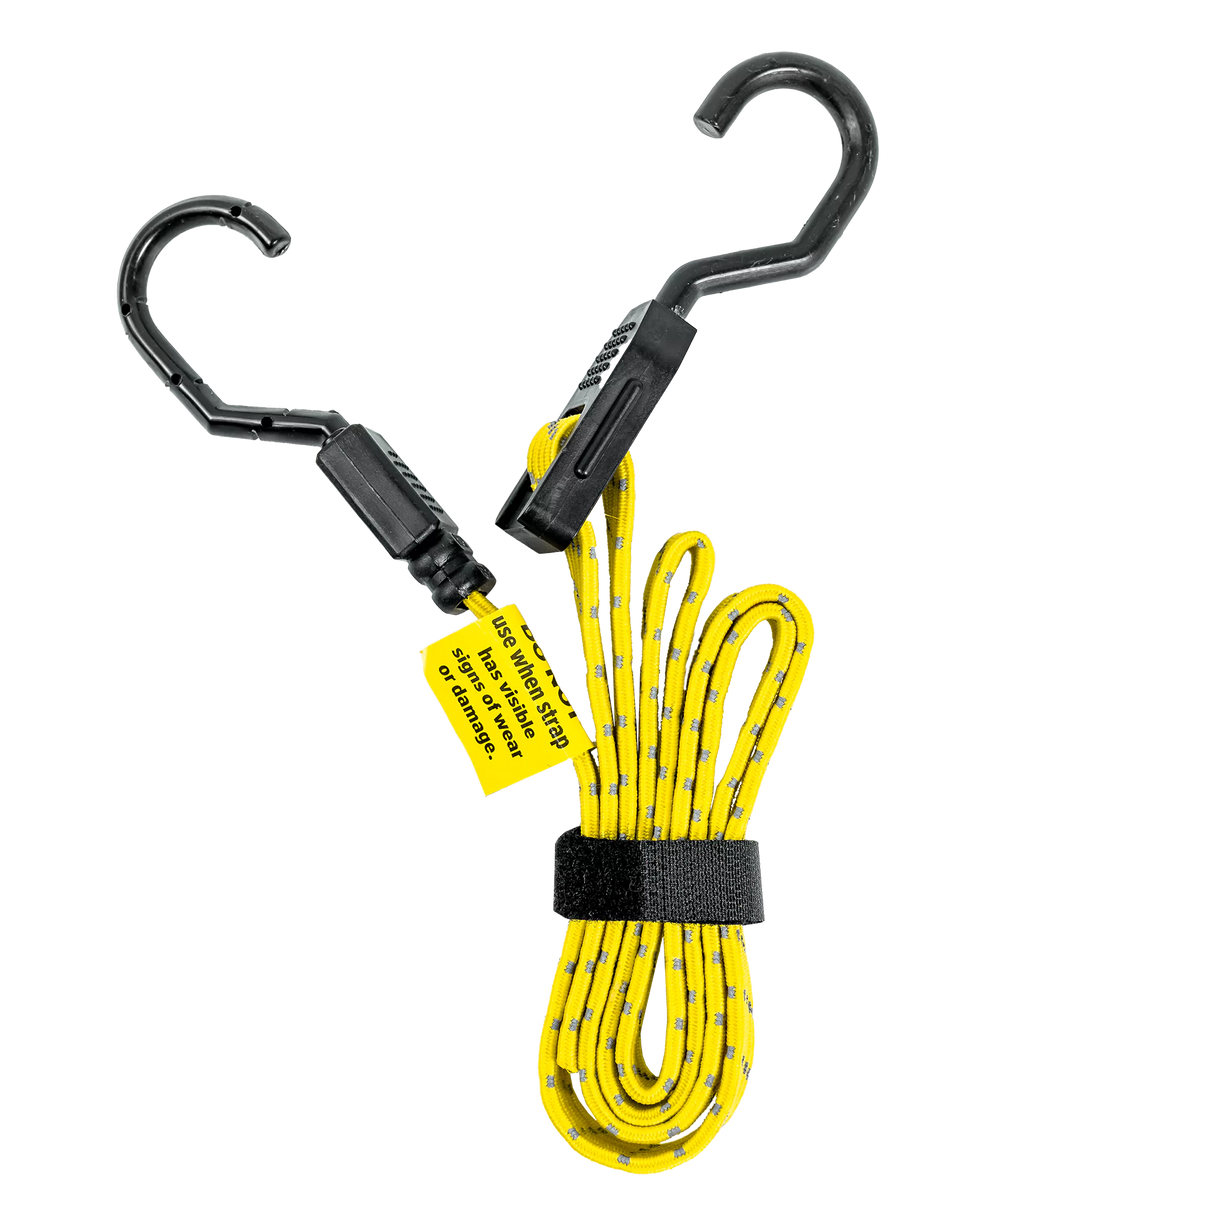 CAOS 1.2m Flat Adjustable Bungee Cord – CAOS Gear